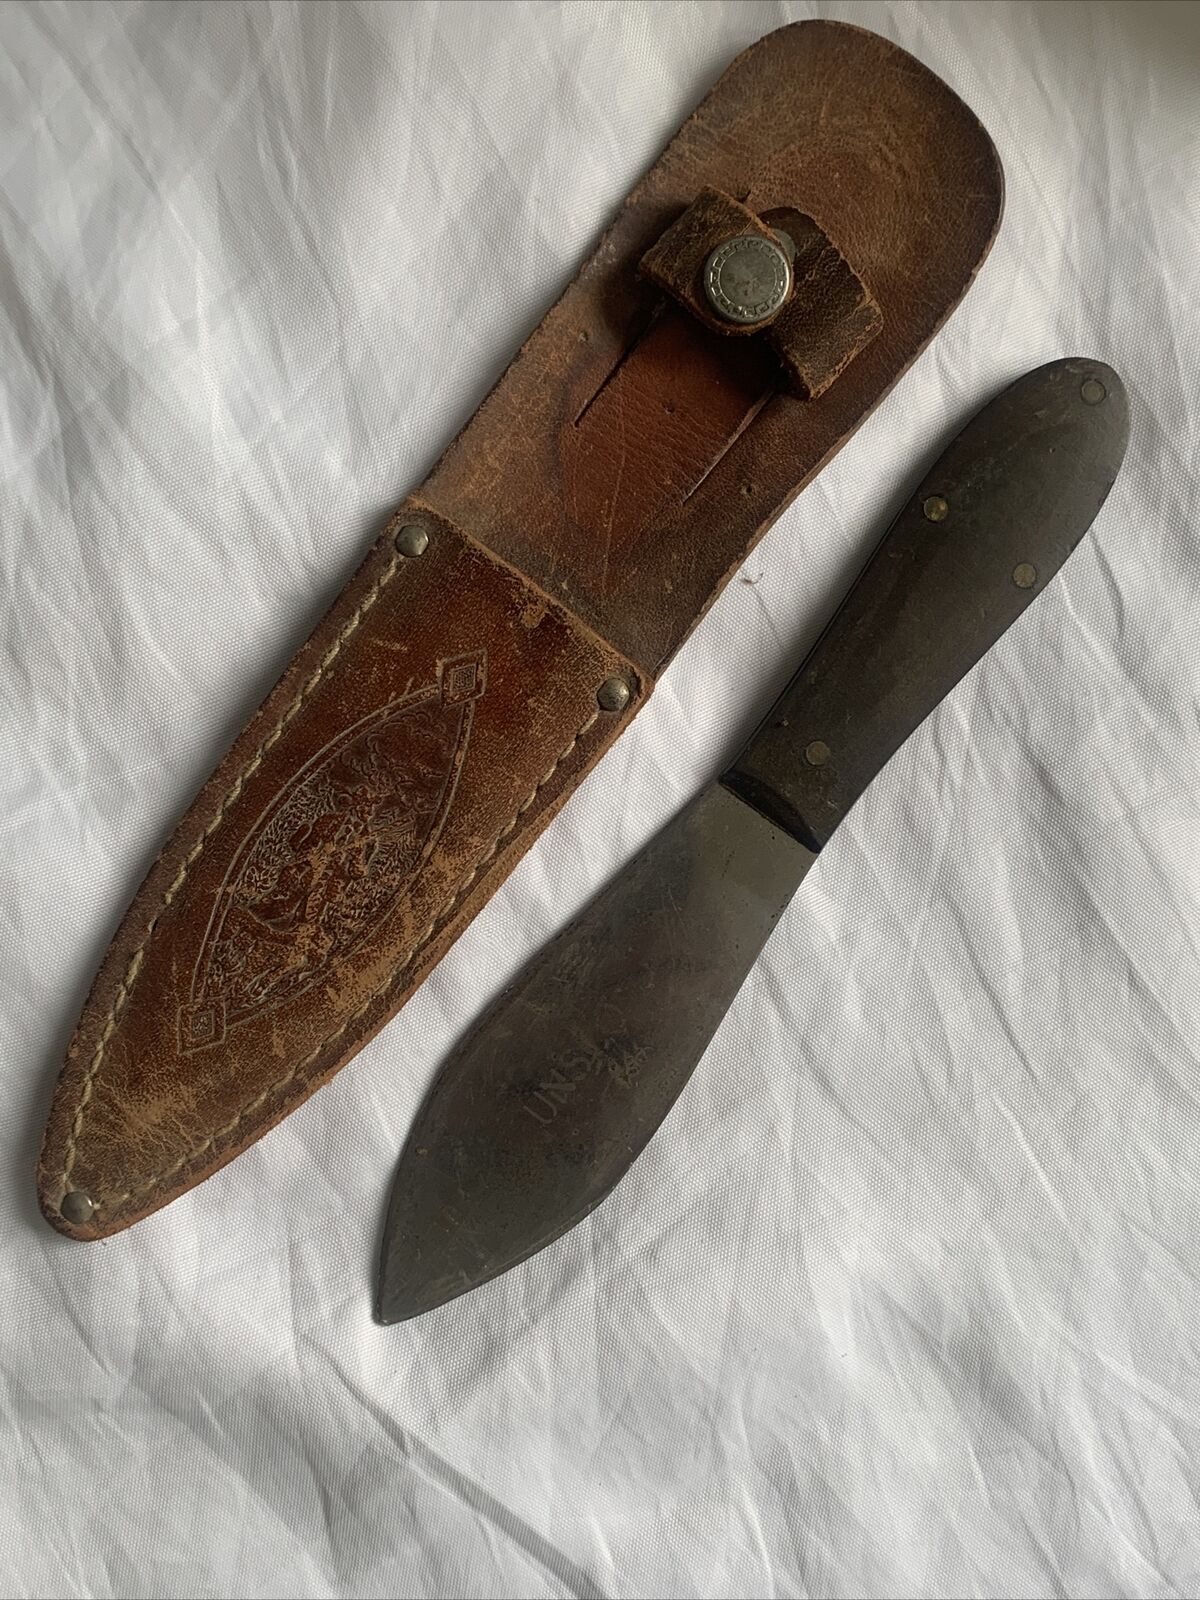 Vintage UNSCO Throwing Knife w/ Leather Sheath - Made In Germany